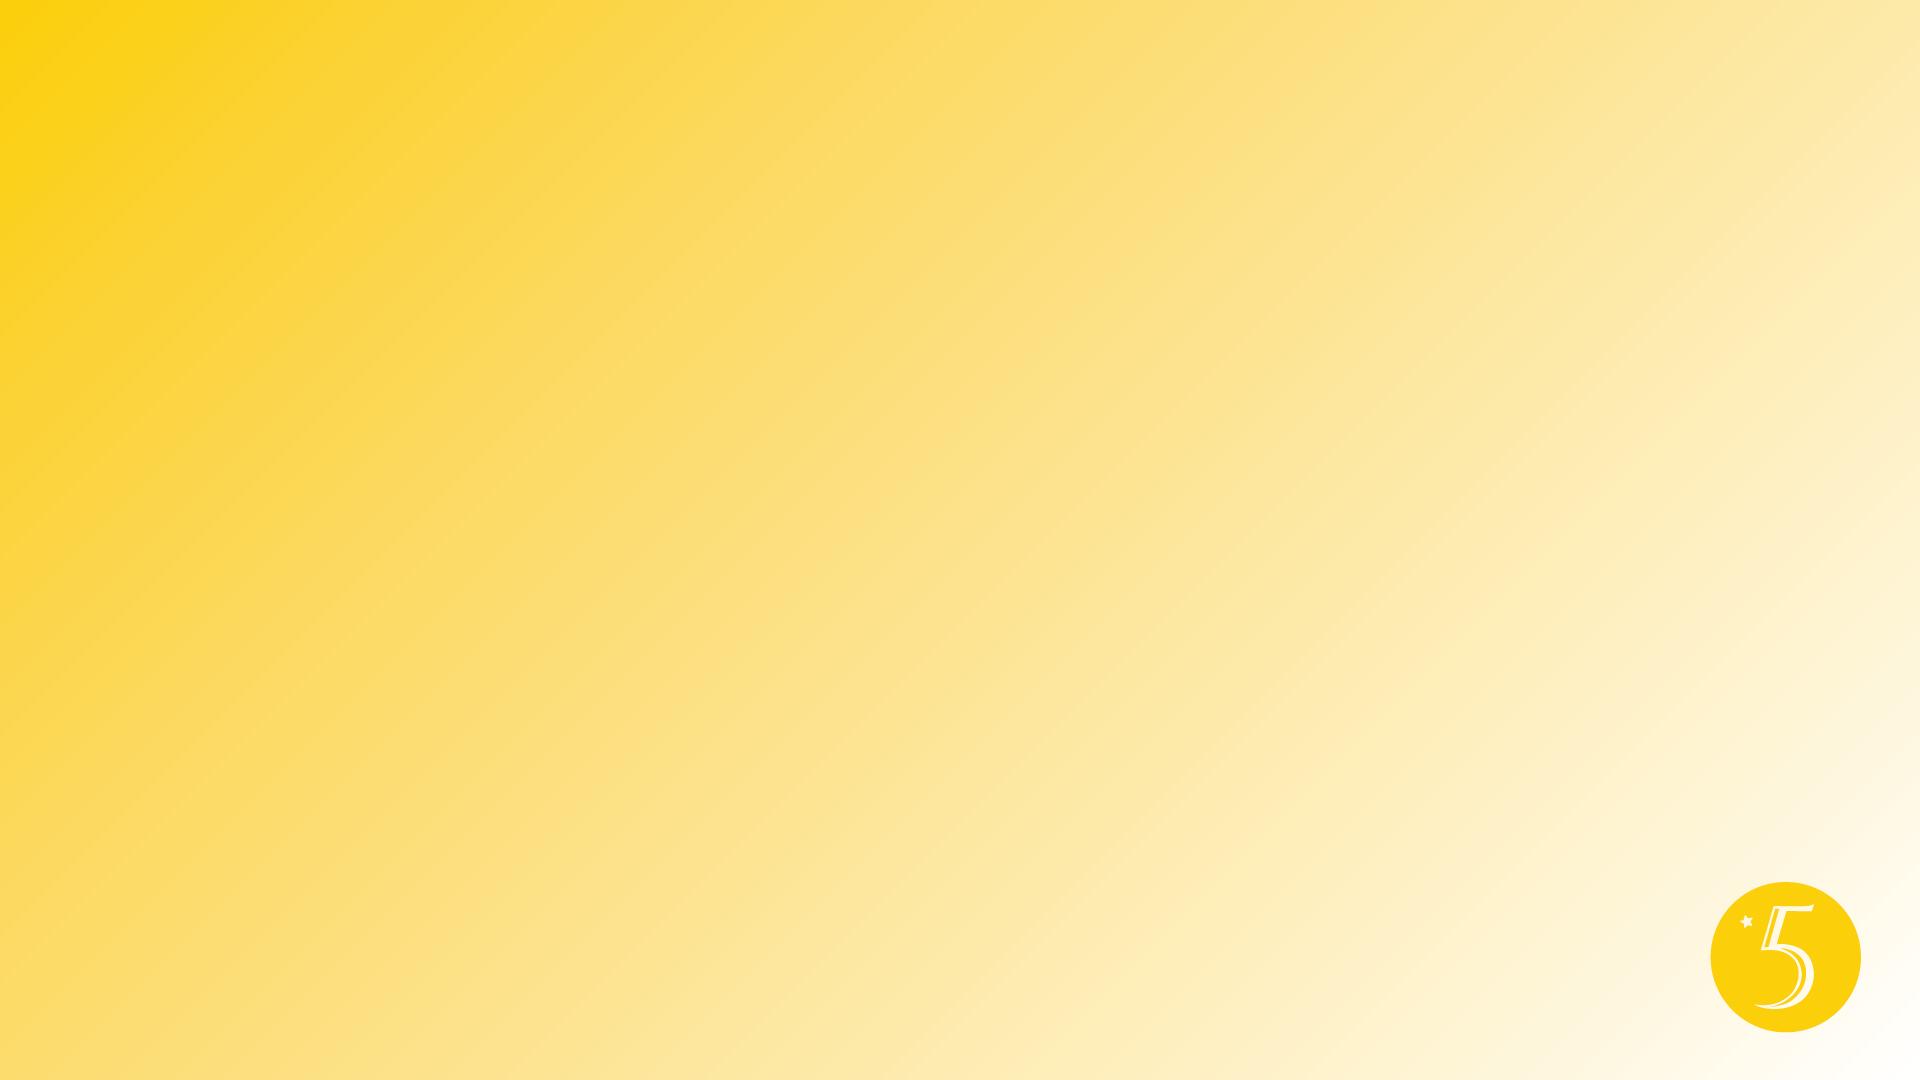 Yellow to white gradient background, yellow circle submark 5 logo with star in bottom right corner